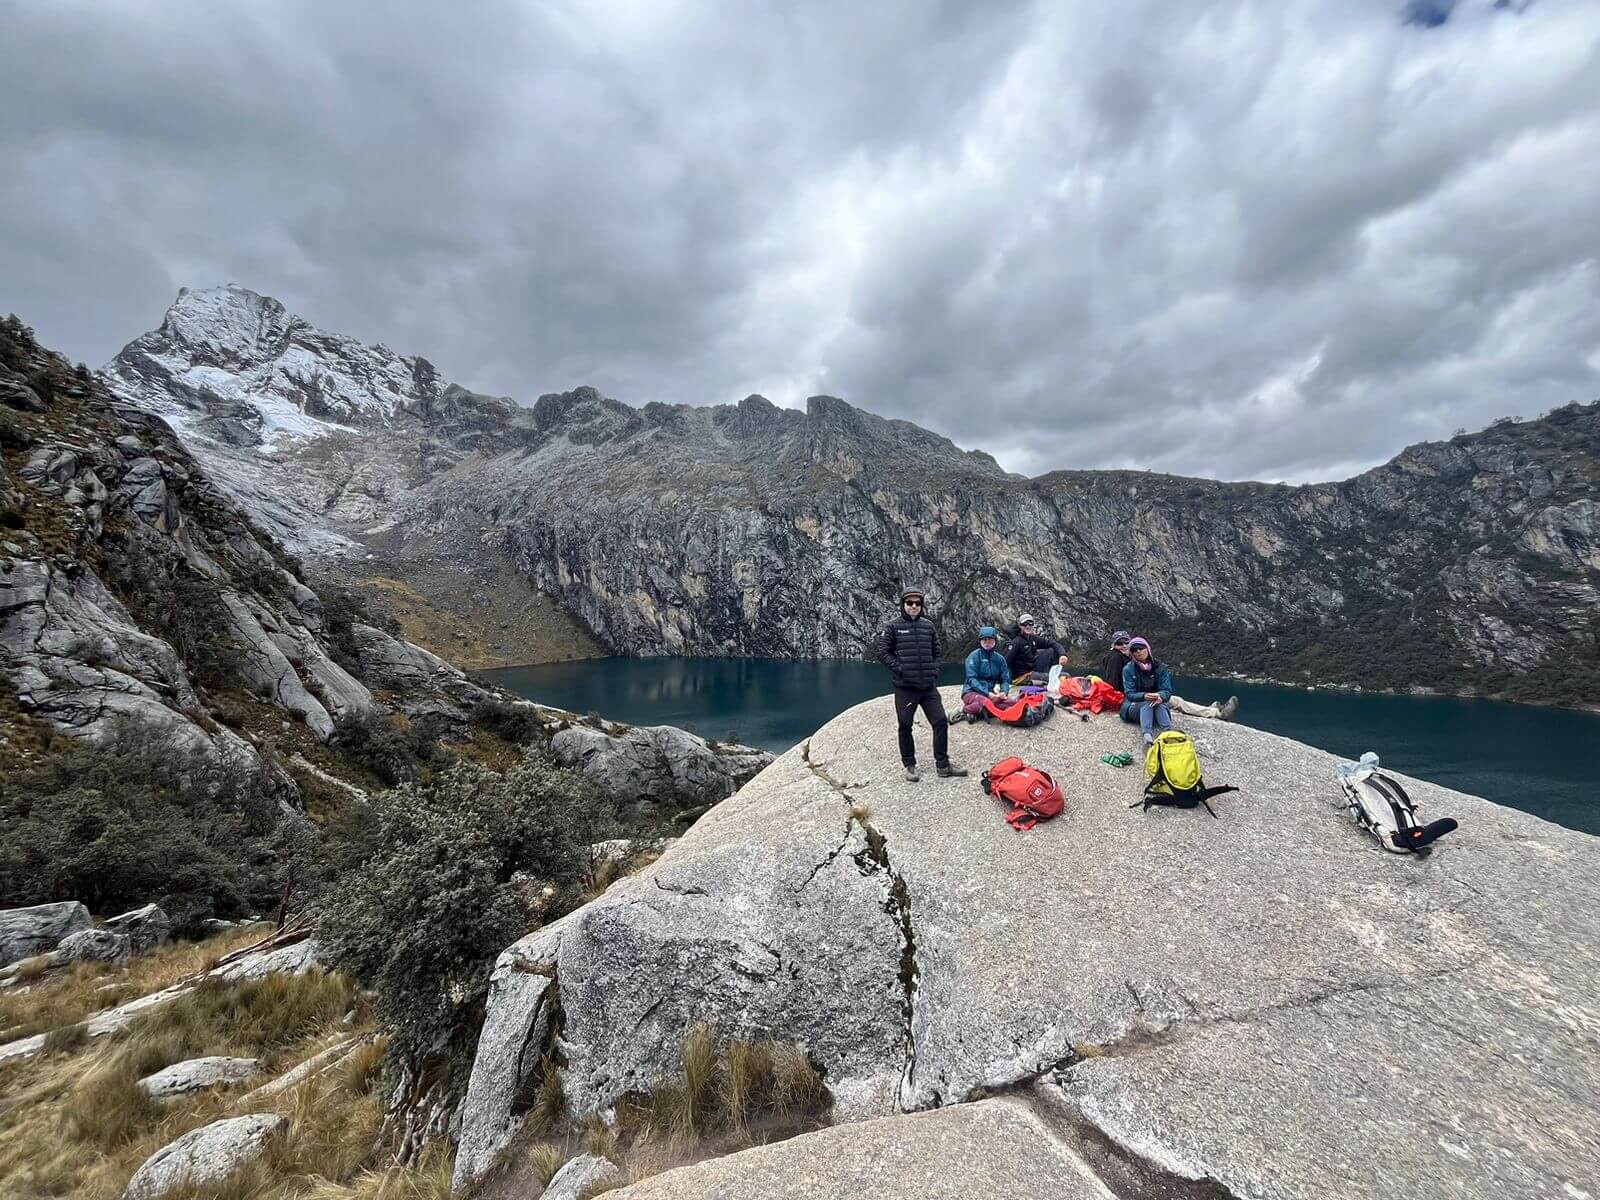 A group of hikers stands on a gray boulder positioned in front of a deep blue alpine lake surrounded by mountains beneath a cloudy sky.